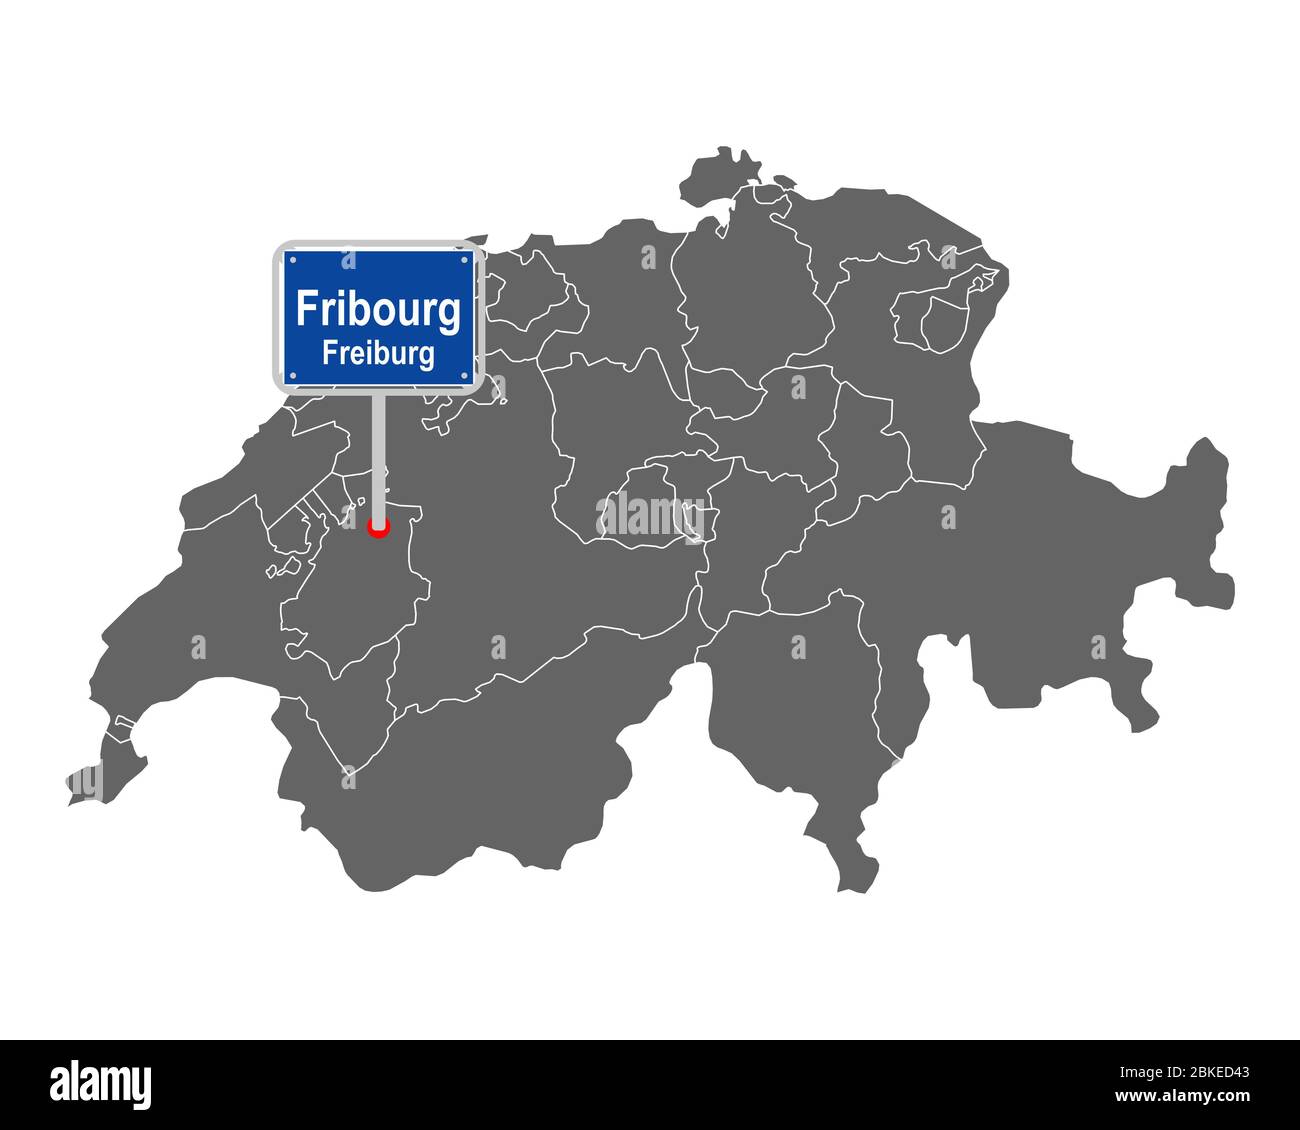 Map of Switzerland with road sign of Fribourg Stock Photo - Alamy.